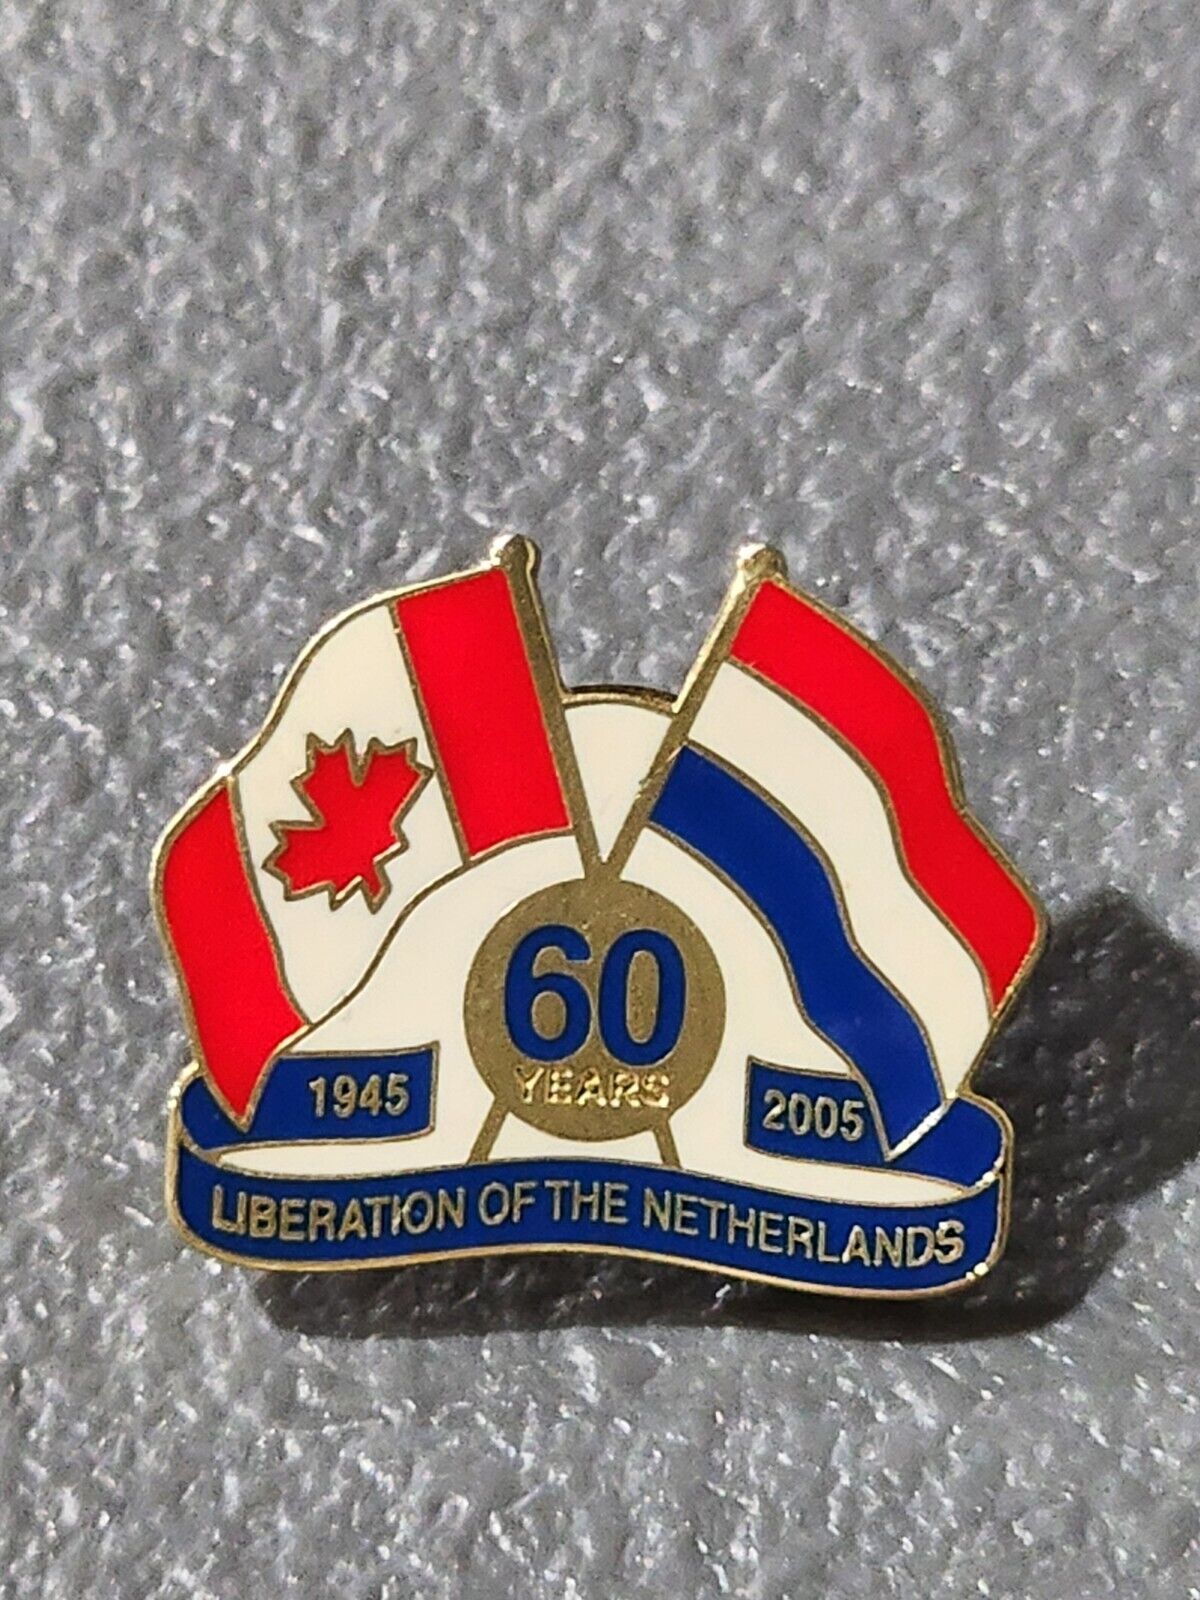 Liberation of the Netherlands 60 Years 1945-2005 Flags Lapel Vintage Tack Pin